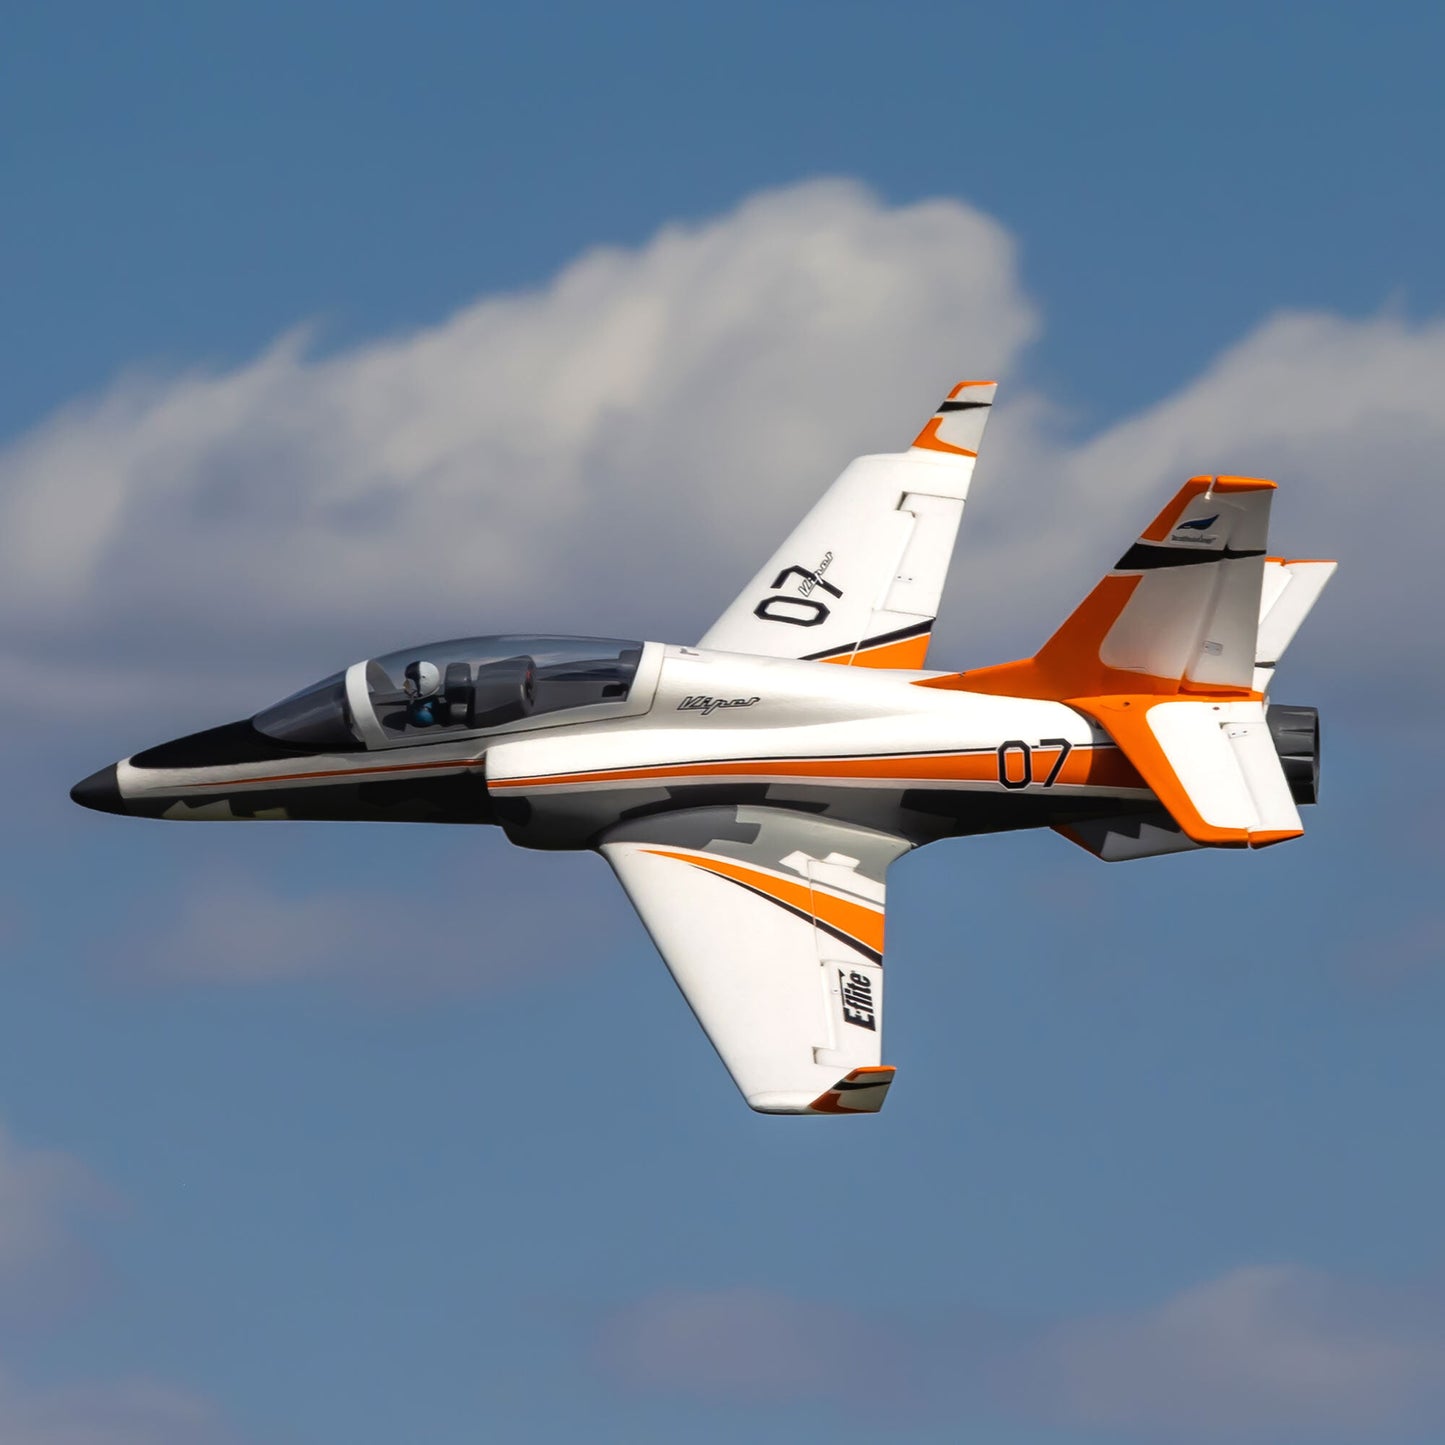 Viper 70 EDF Jet BNF Basic w/ AS3X and SAFE Select